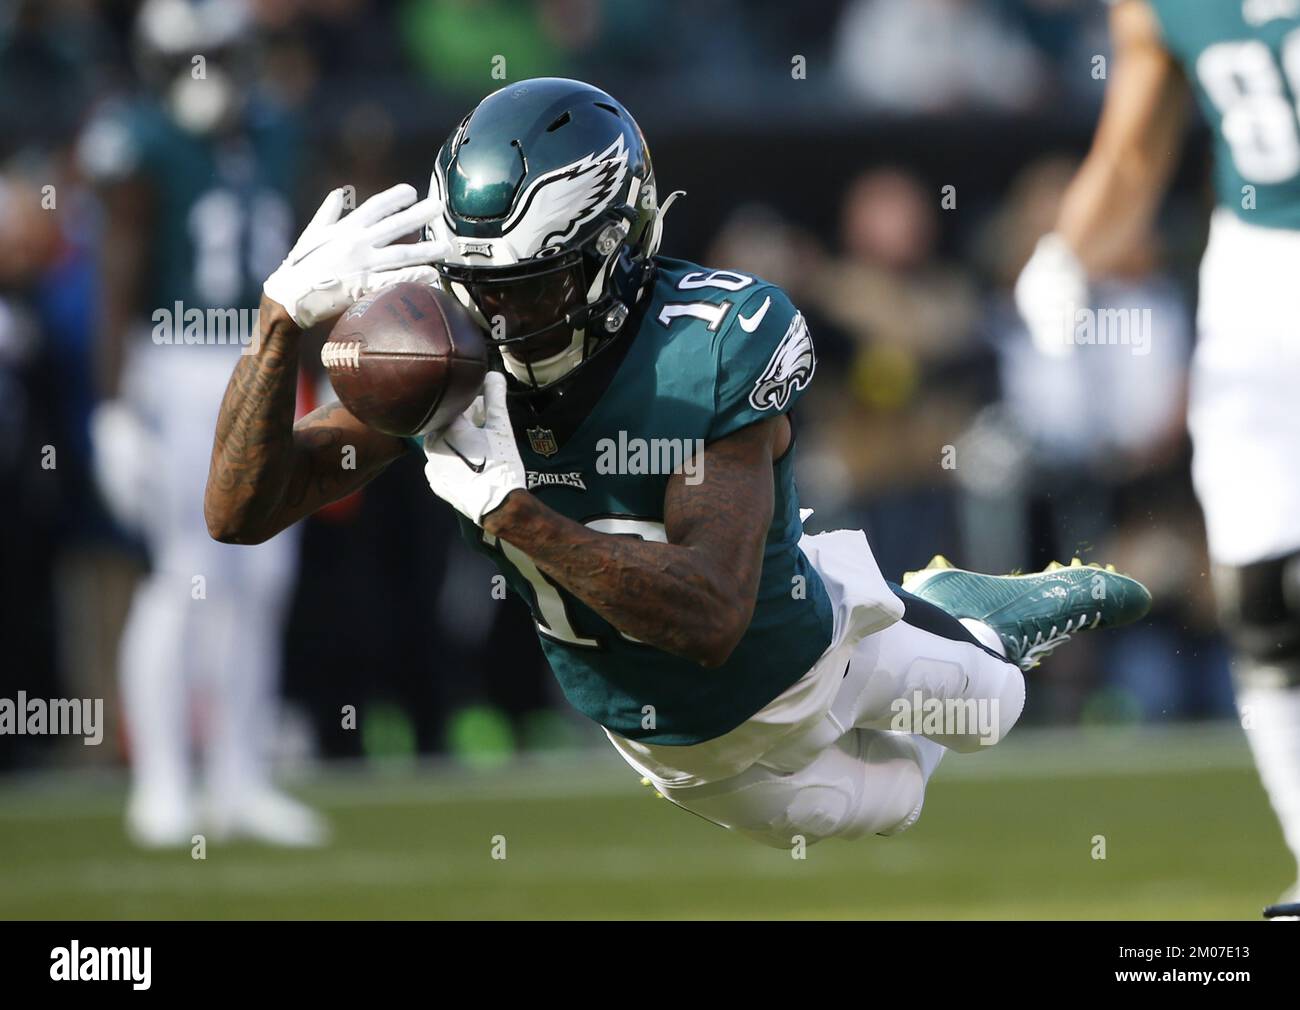 Philadelphia, United States. 04th Dec, 2022. Philadelphia Eagles Quez Watkins dives for a football reception and fails to make the catch on a play that was negated due to a penalty in the first half against the Tennessee Titans in week 13 of the NFL season at Lincoln Financial Field in Philadelphia on Sunday, December 4, 2022. The Eagles defeated the Titans 35-10. Photo by John Angelillo/UPI Credit: UPI/Alamy Live News Stock Photo